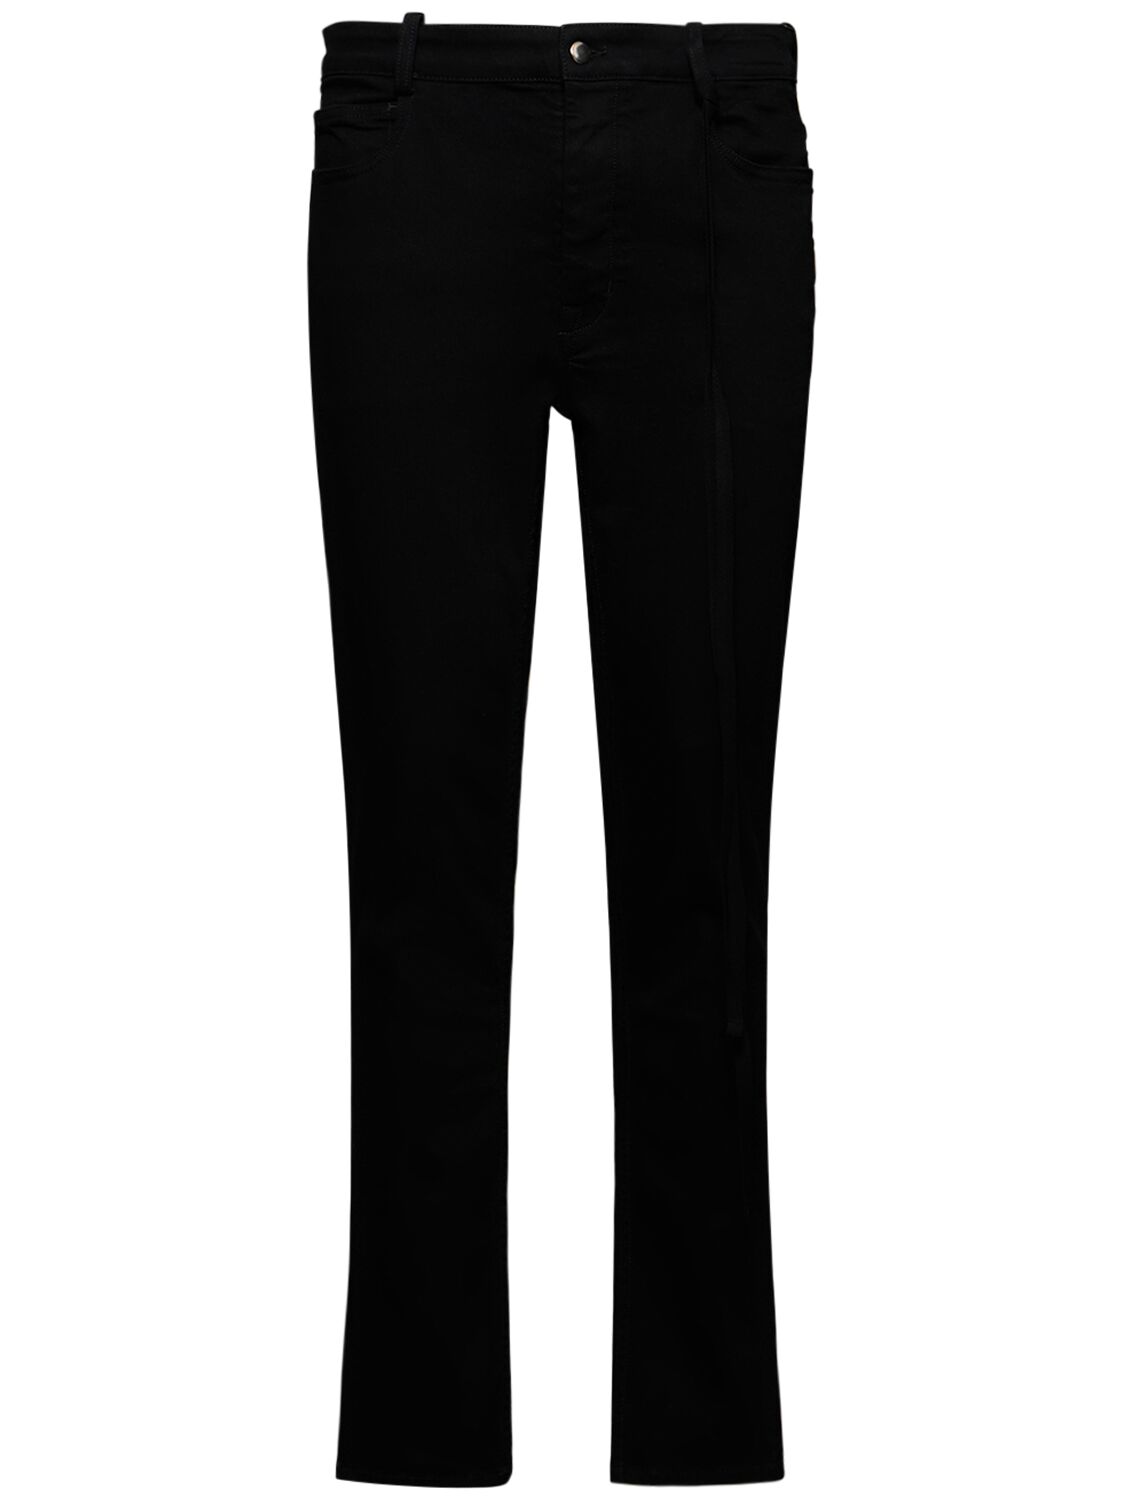 Image of Wout Cotton Blend Skinny Pants